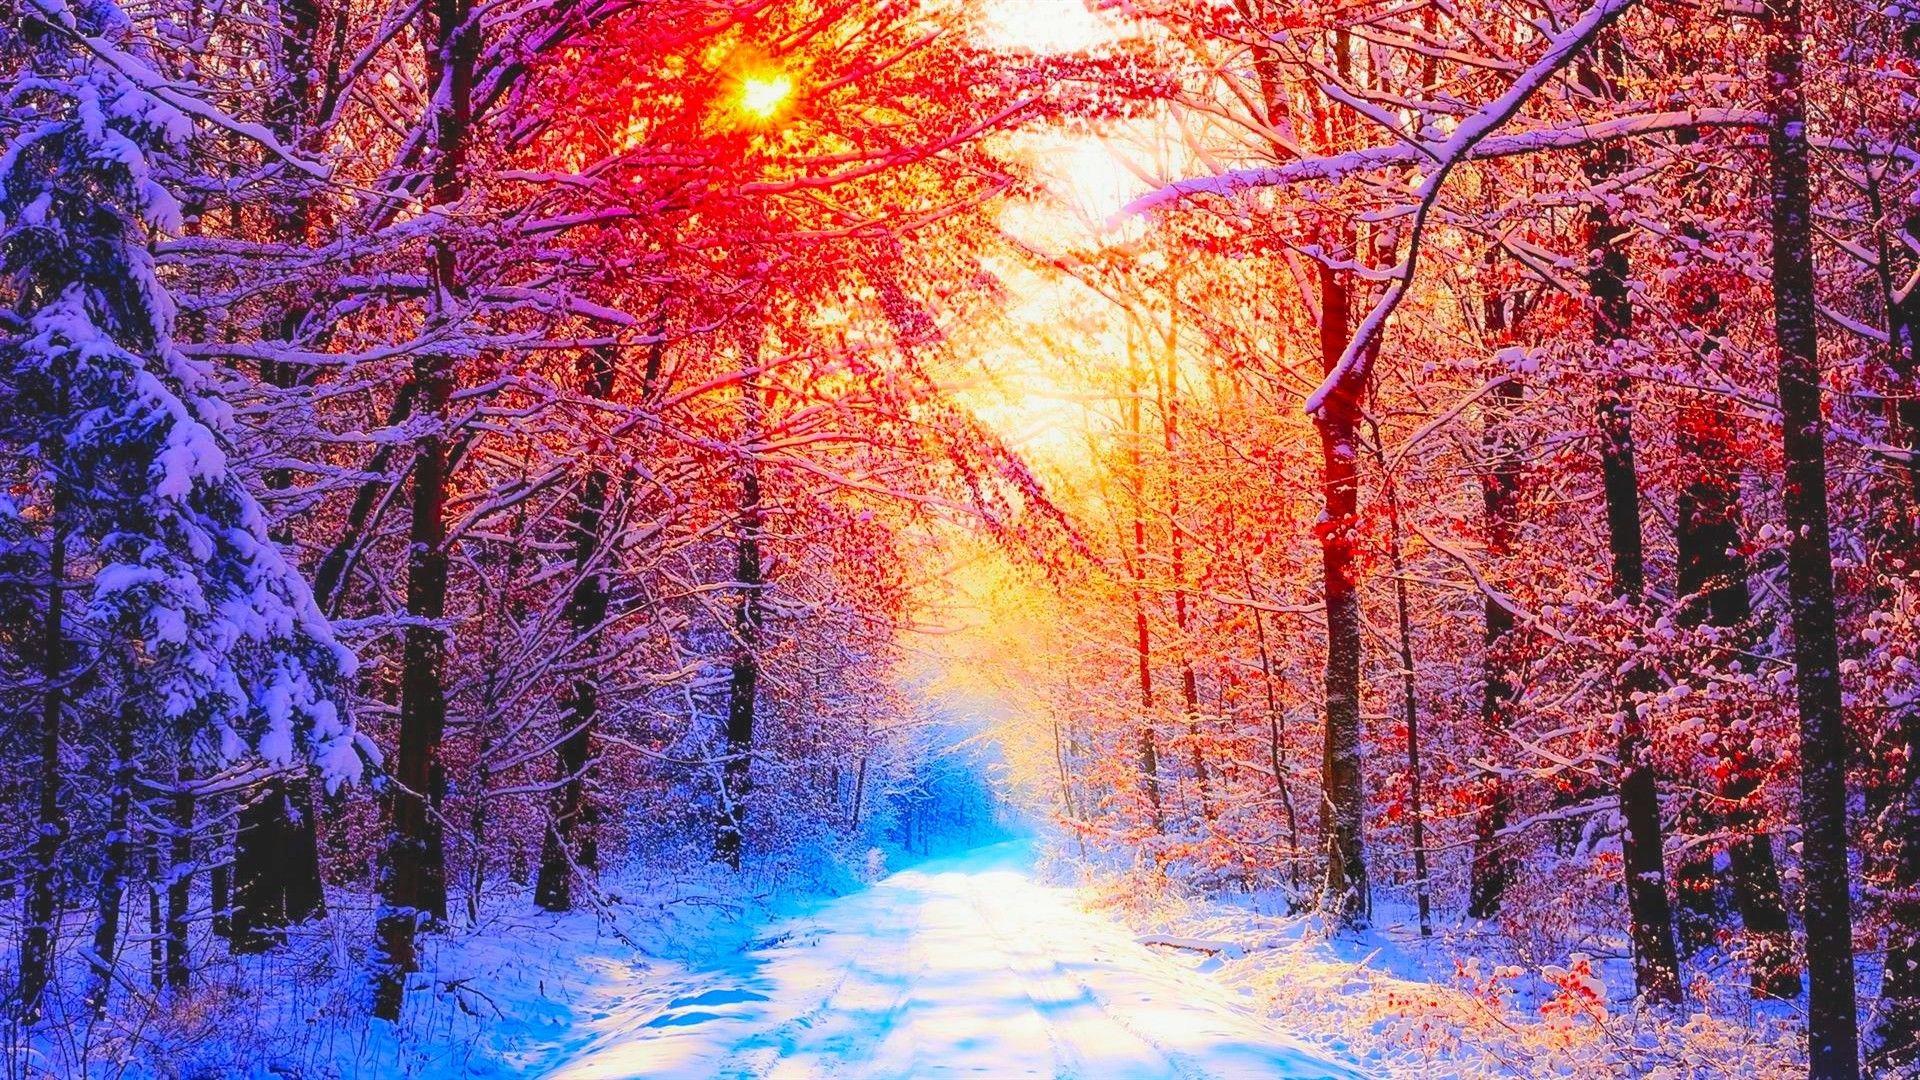 Winter iPhone Wallpapers  28 Cute Winter iPhone Backgrounds  Winter  wallpaper Winter landscape Winter scenery